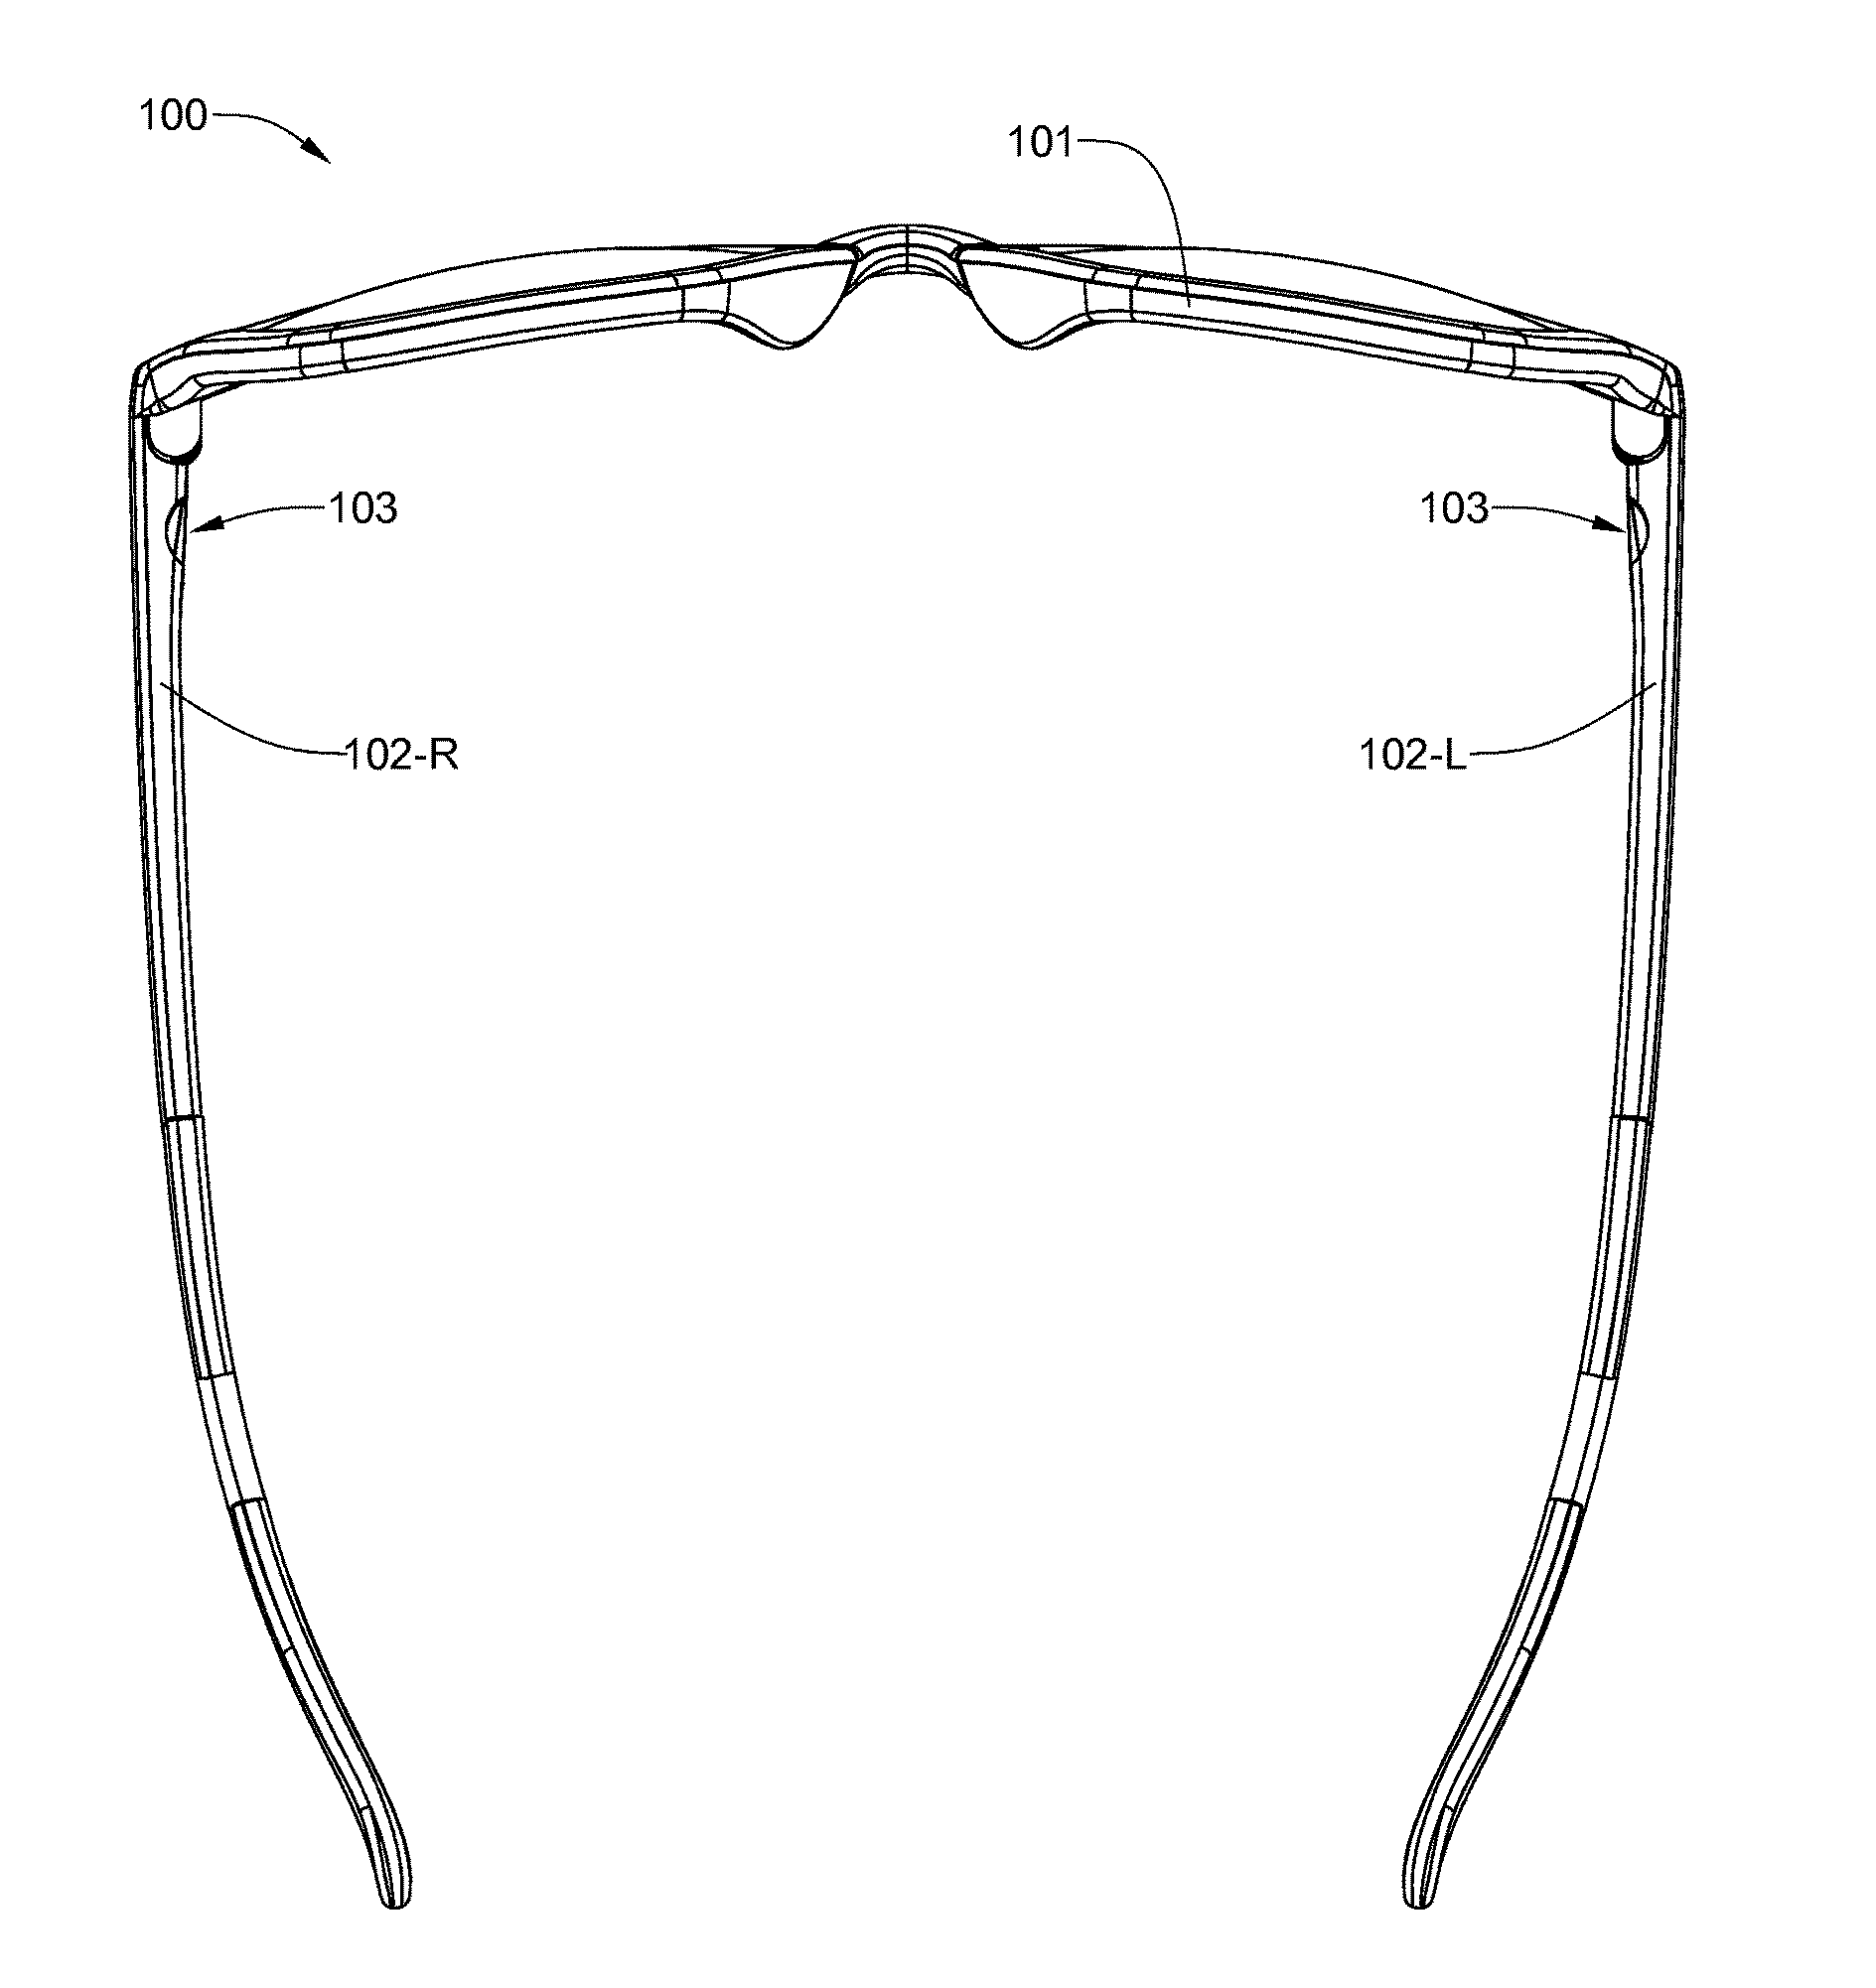 Eyeglass frame having selectively interchangeable temples with simplified recessed interconnection clips